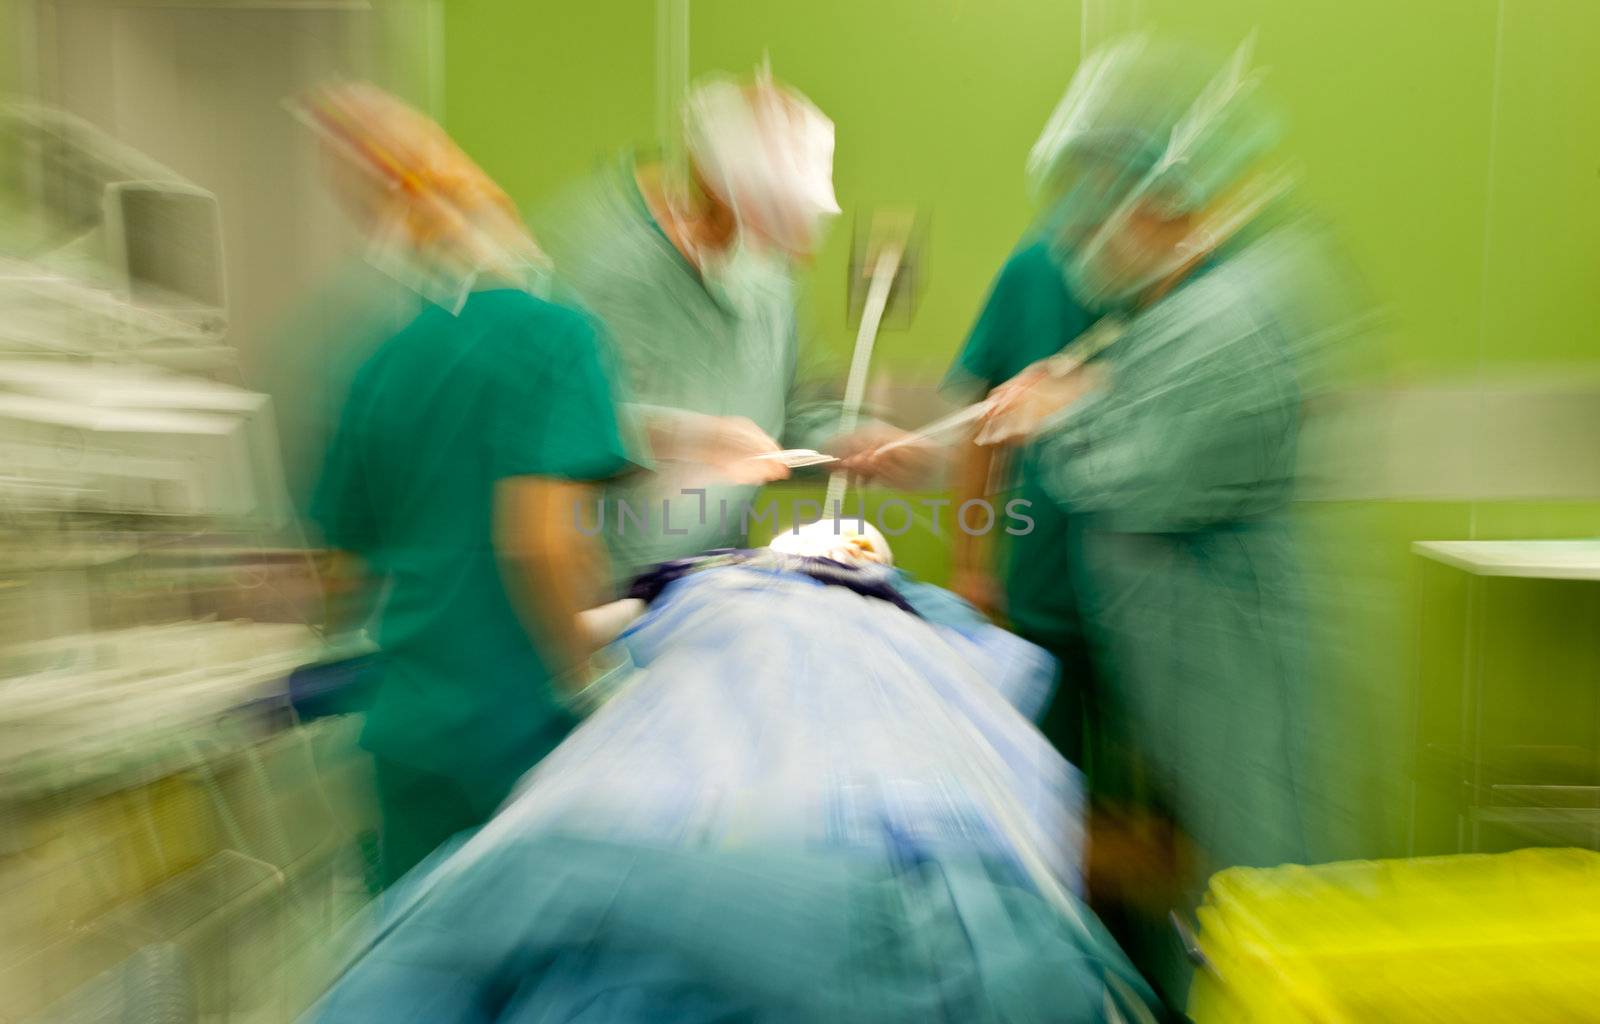 Hospital blurred doctors busy surgery by vilevi